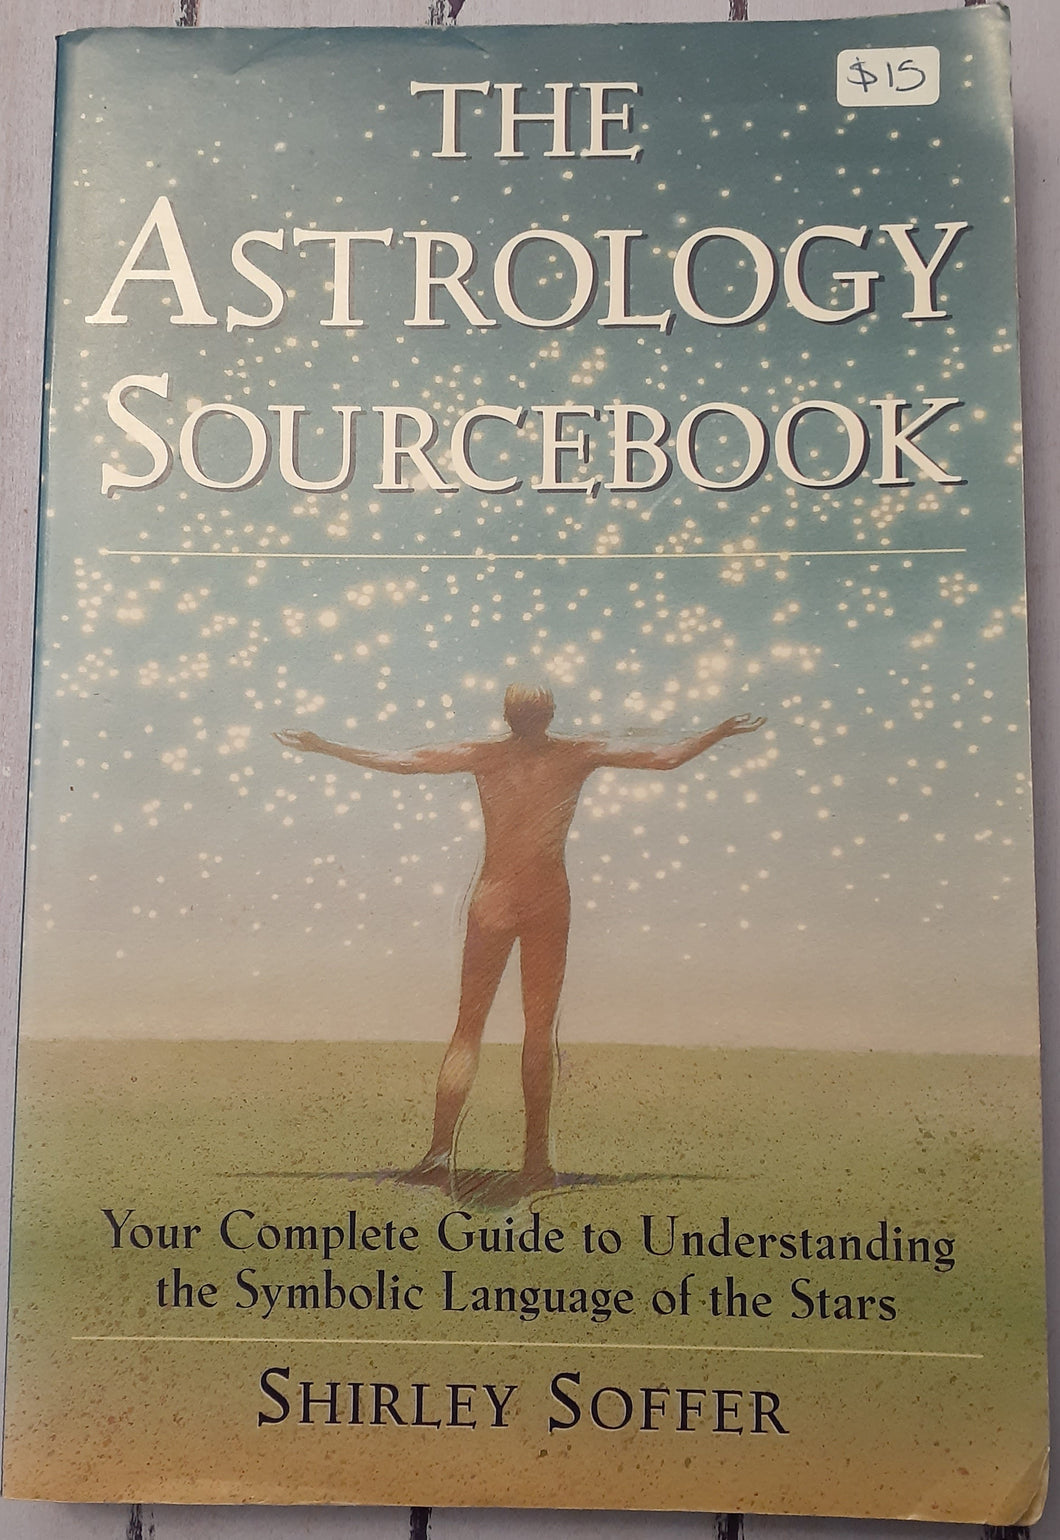 The Astrology Sourcebook